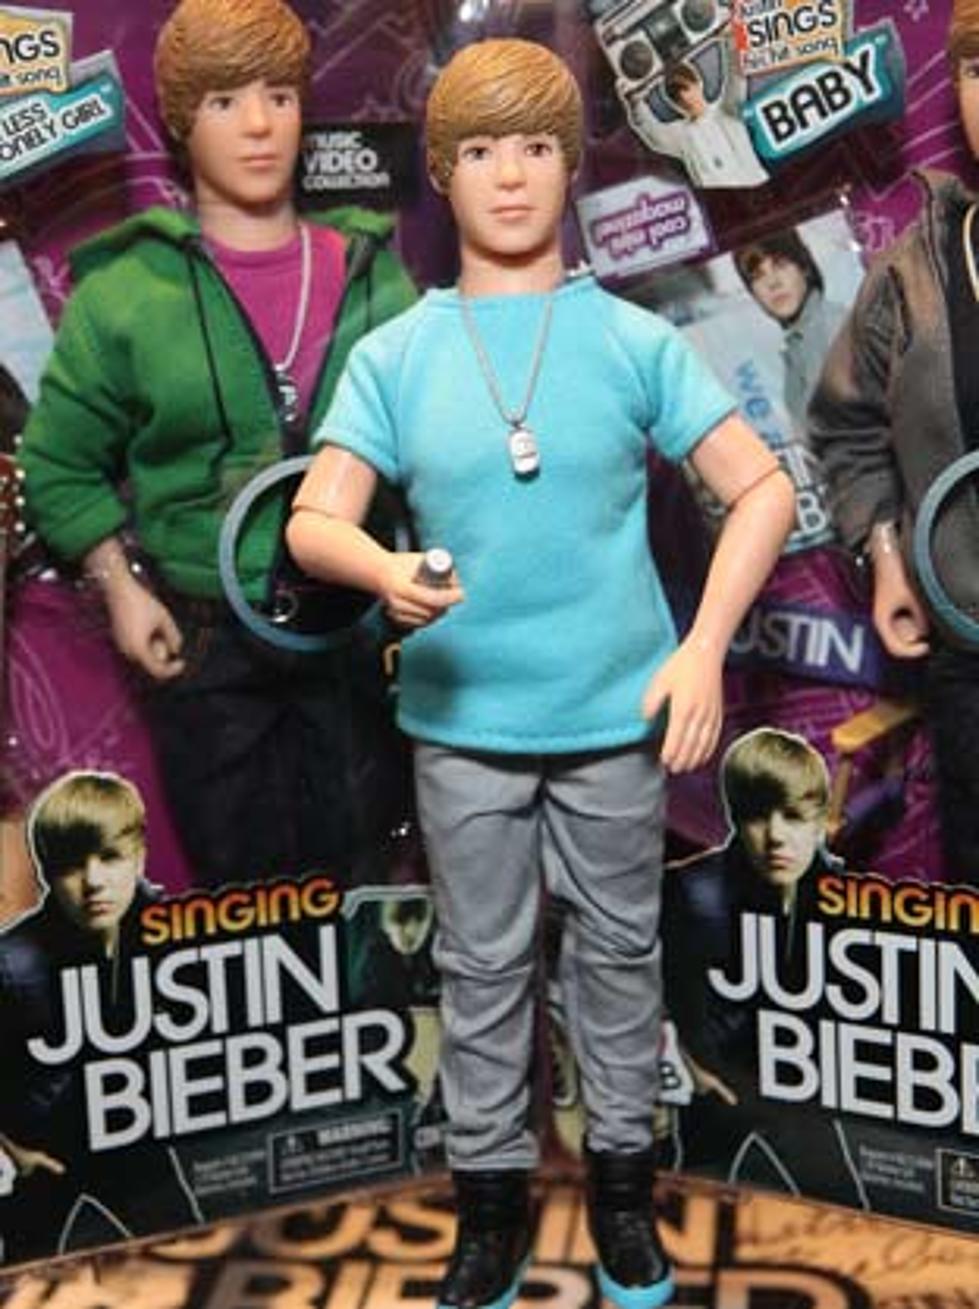 Police Officer Claims Girlfriend Attacked Him With Justin Bieber Doll